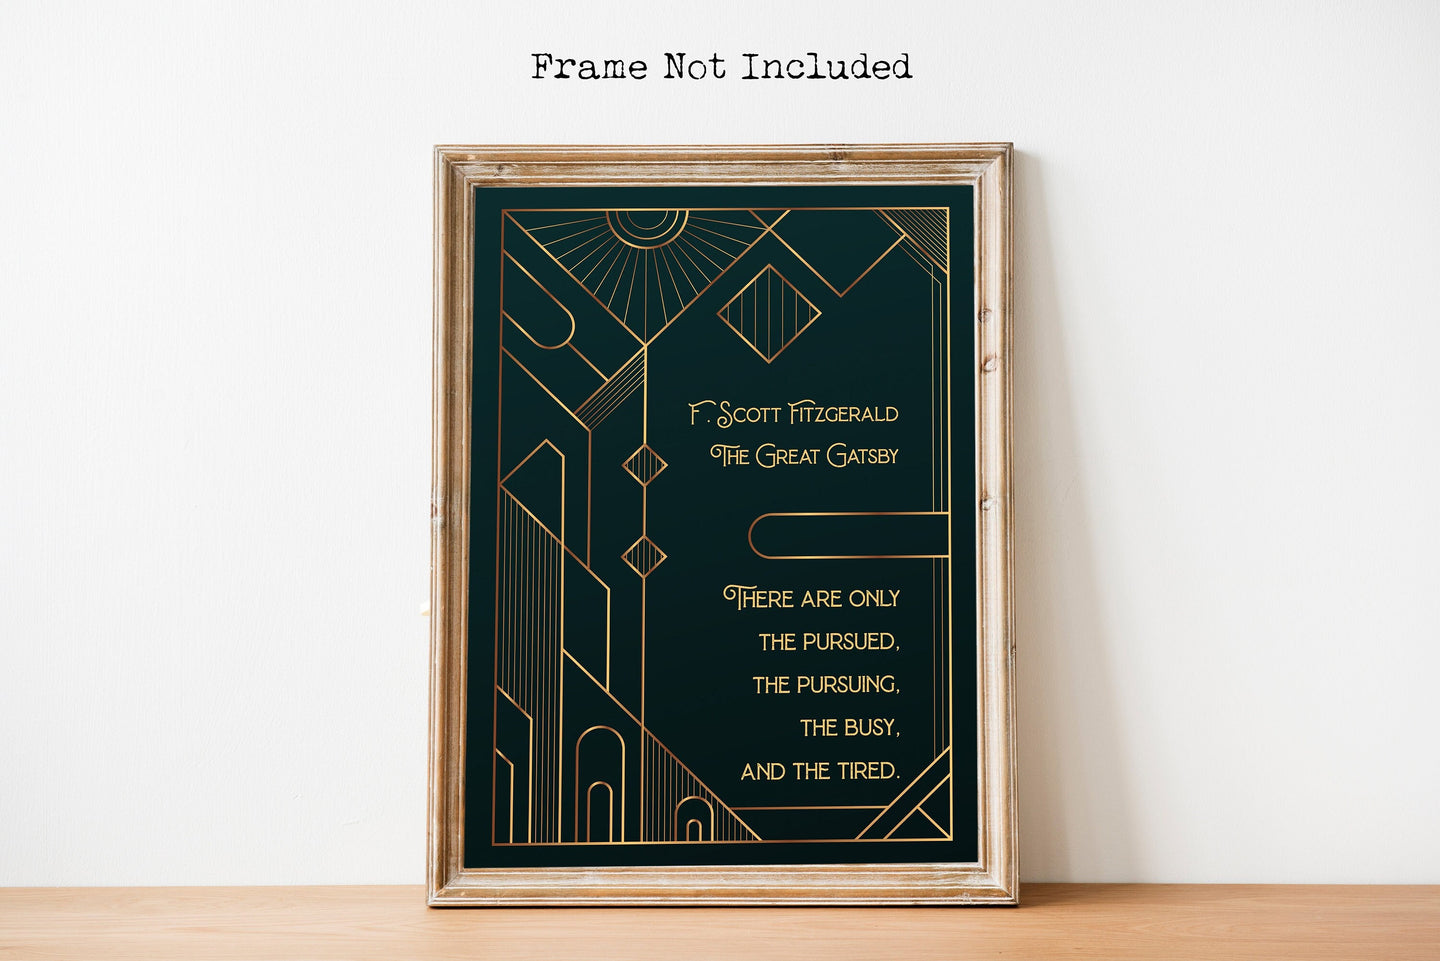 F Scott Fitzgerald Quote From The Great Gatsby - There are only the pursued, the pursuing, the busy and the tired. Art Deco Book Quote Print